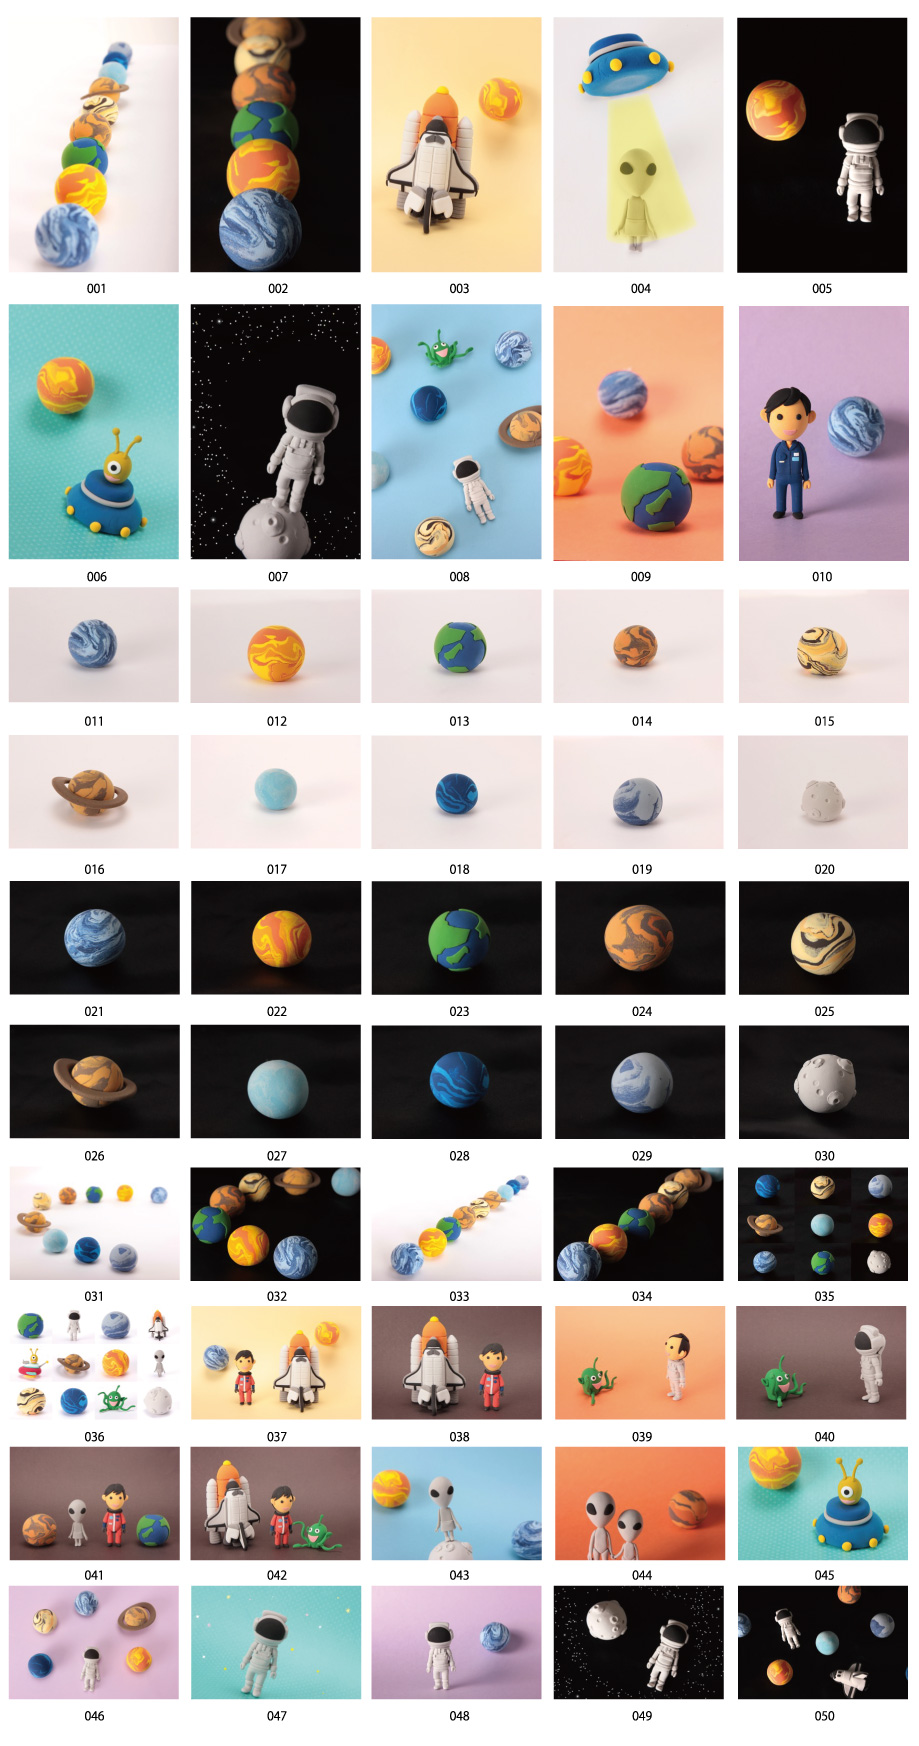 Clay Planets and Space Stock Photos